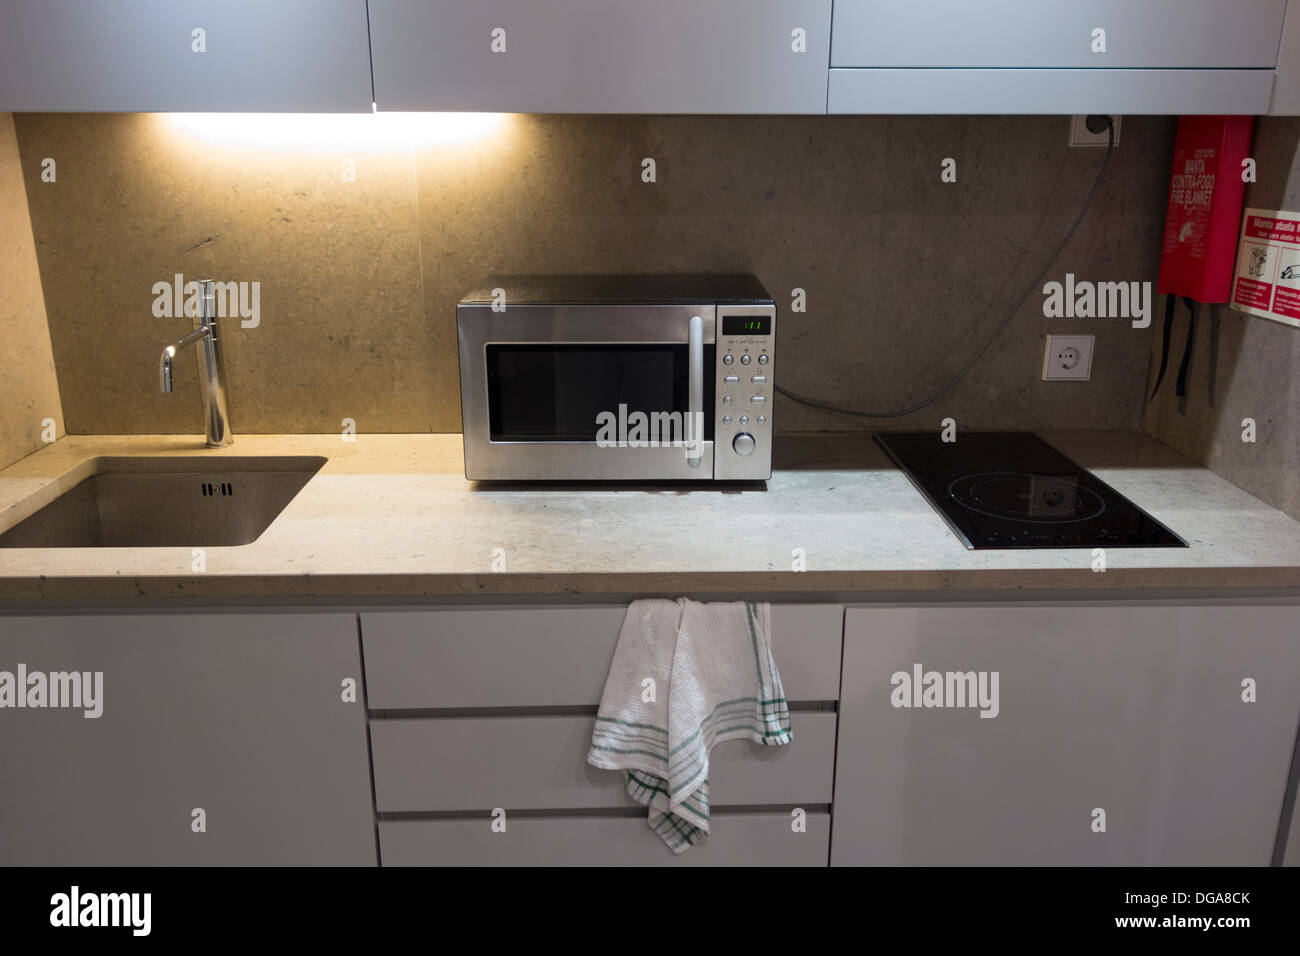 Small modern white kitchen counter with microwave oven Stock Photo